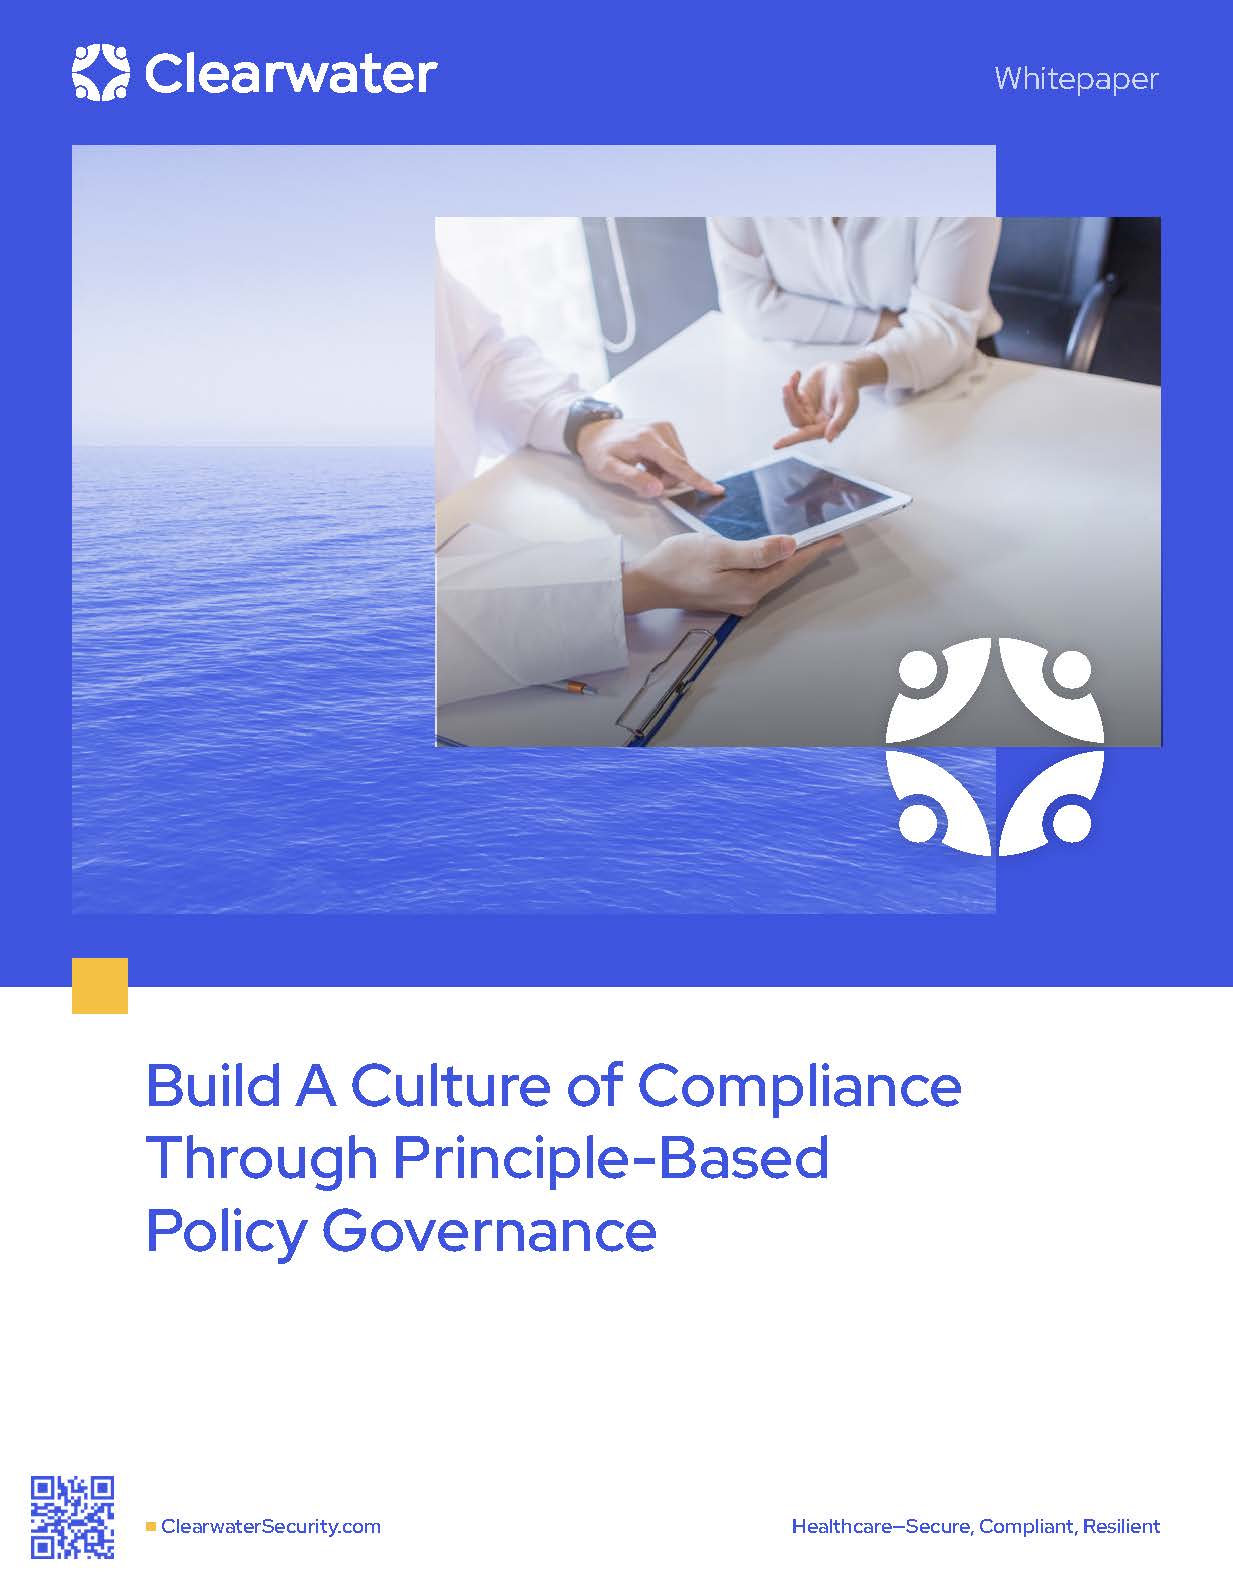 Build a Culture of Compliance Through Principle-based Policy Governance by Clearwater